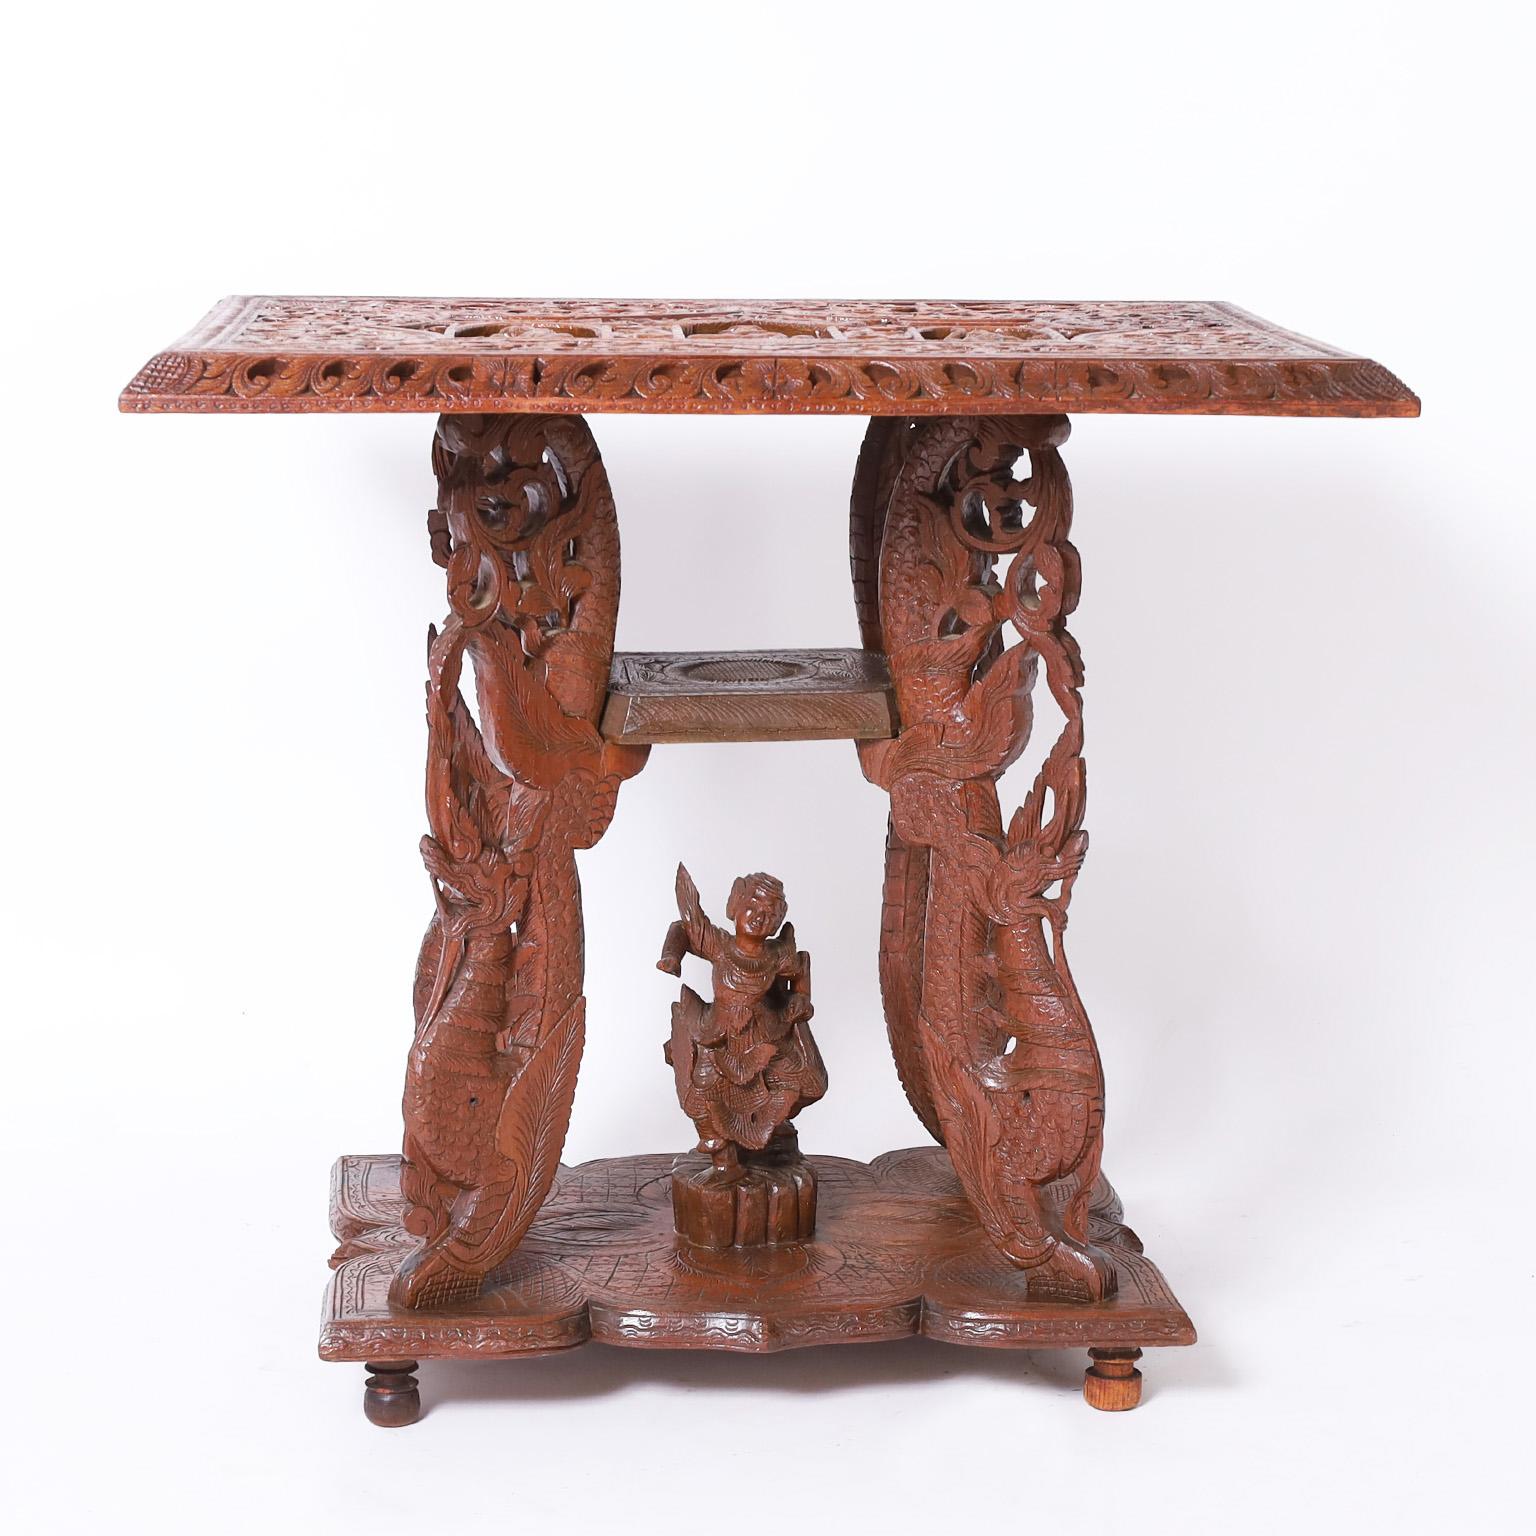 Antique Anglo Indian stand with a dramatic form, crafted in mahogany with an elaborately carved rectangular top depicting niches, gods, and deities in a floral field, supported by four carved dragon legs on a platform with a dancing figure.